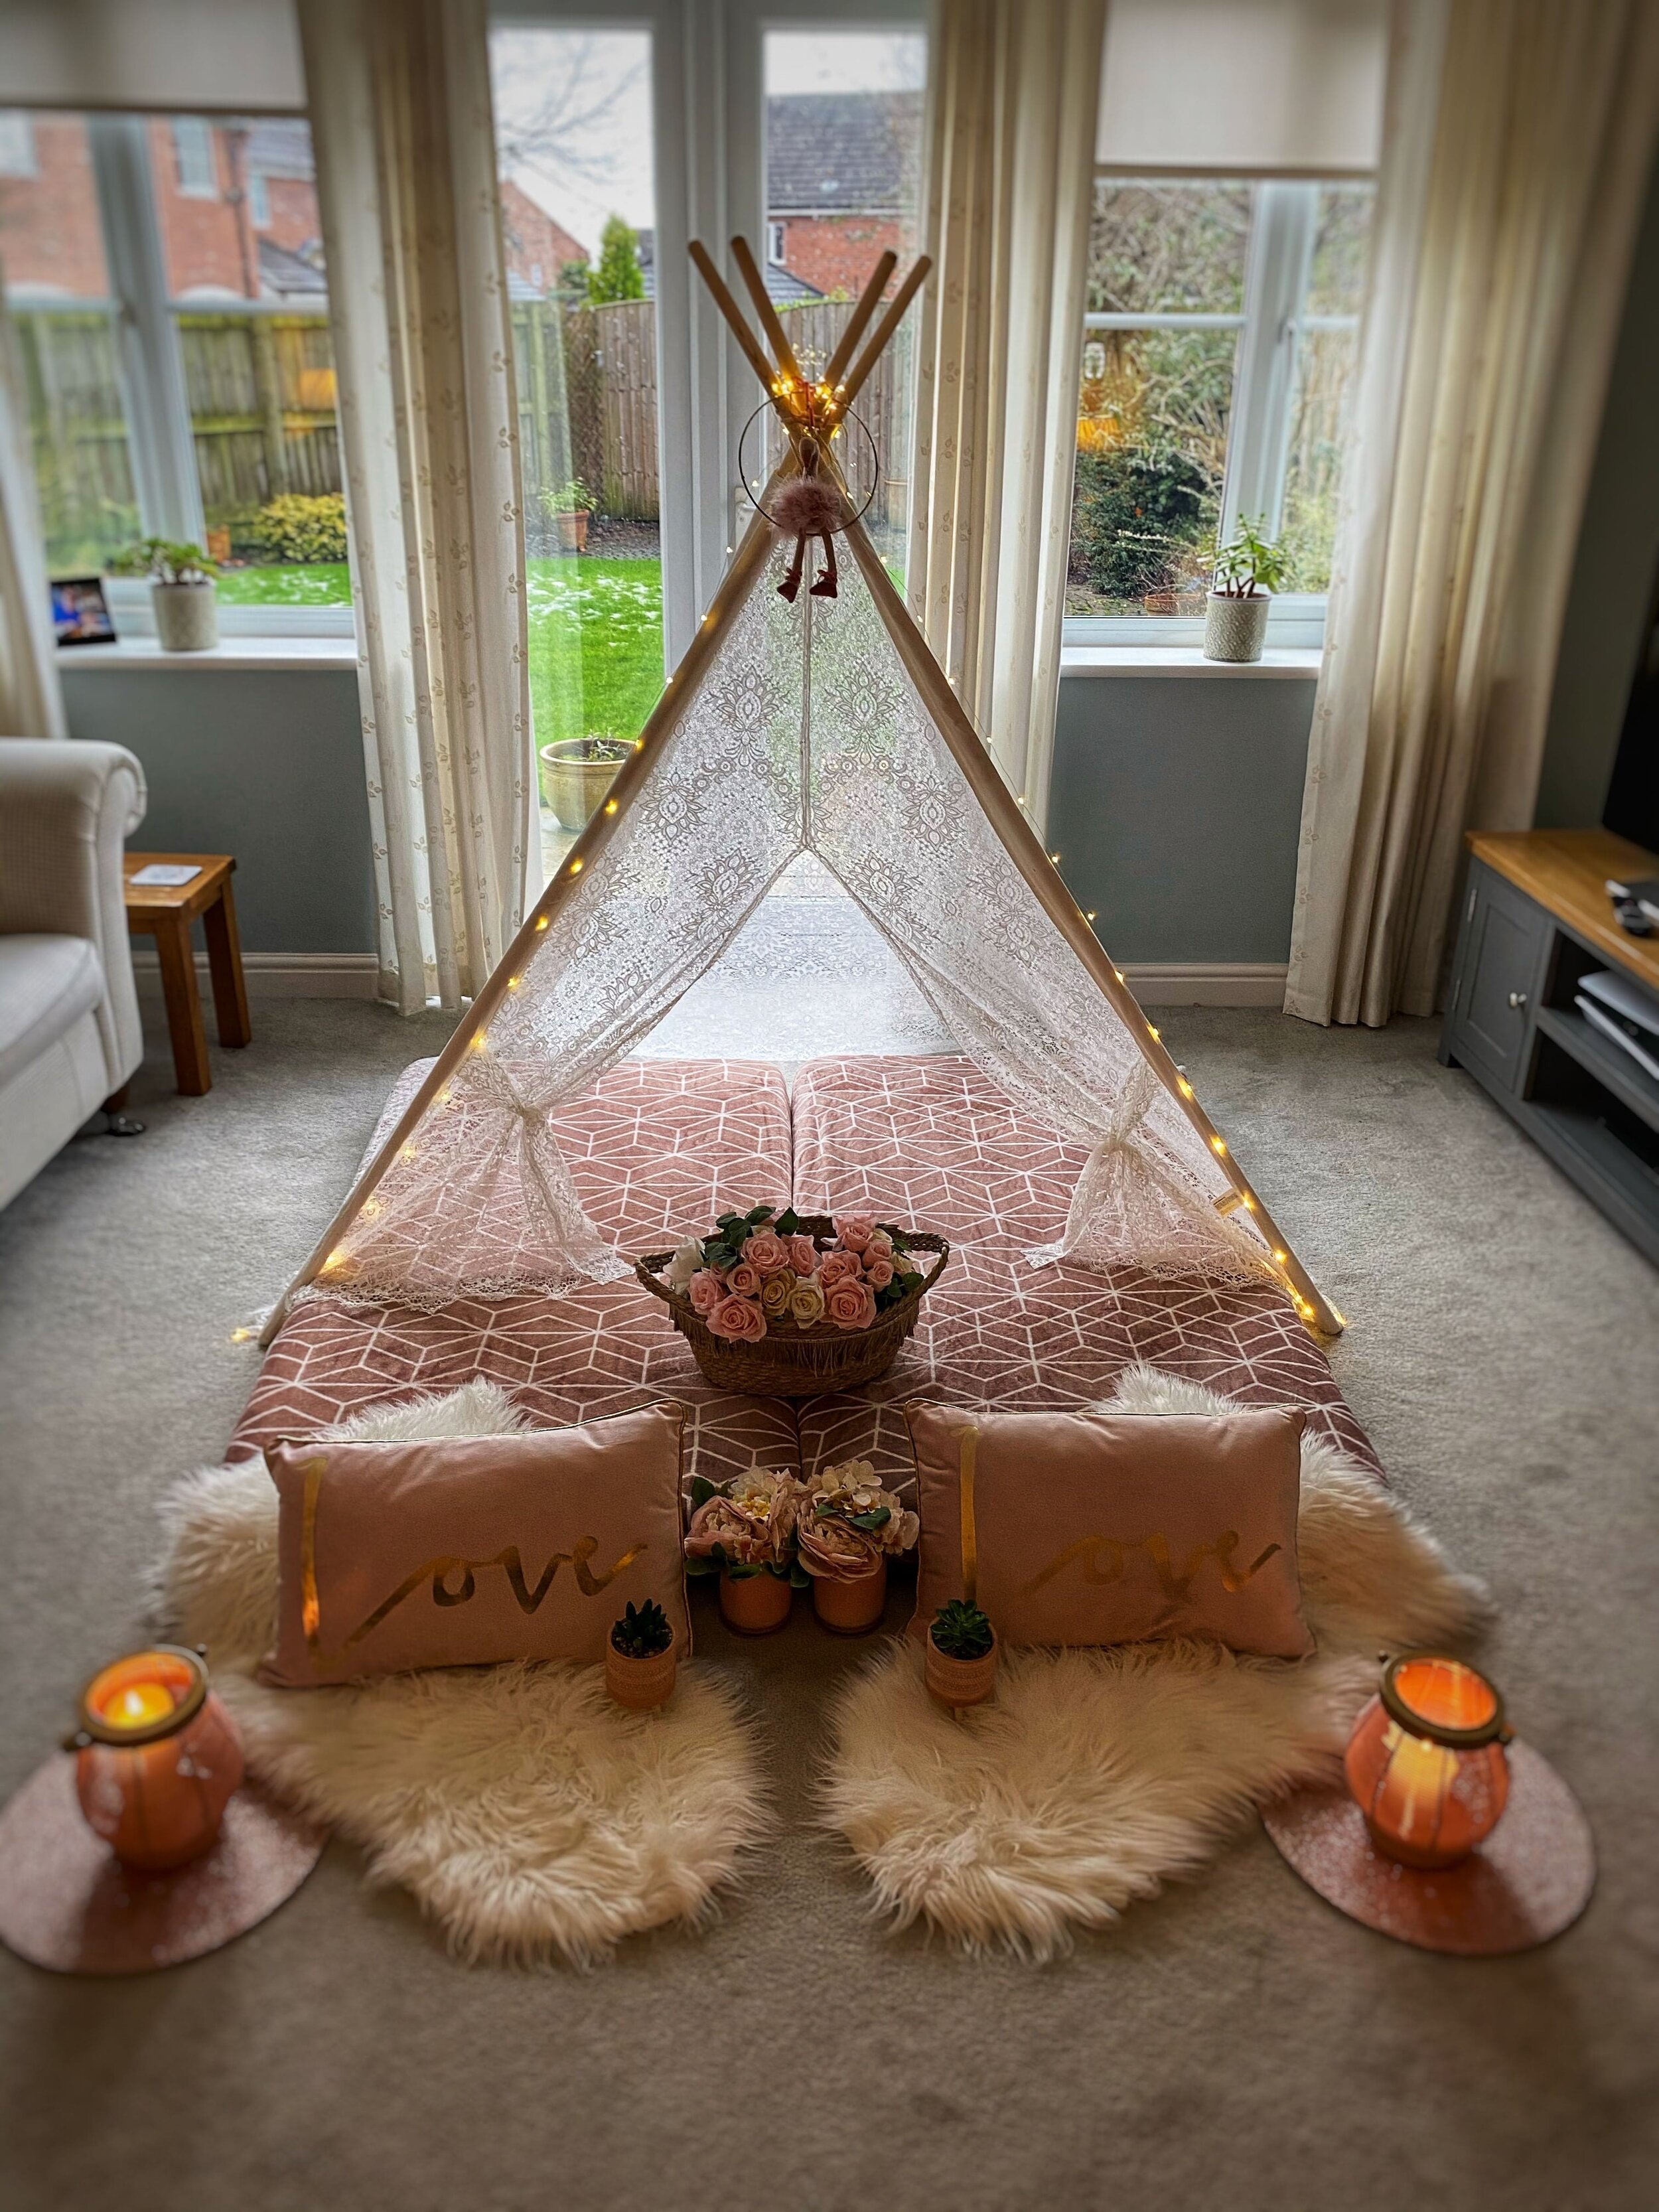 The Little Sleepy Teepee Company - Sleepover Party Tents in Staffordshire